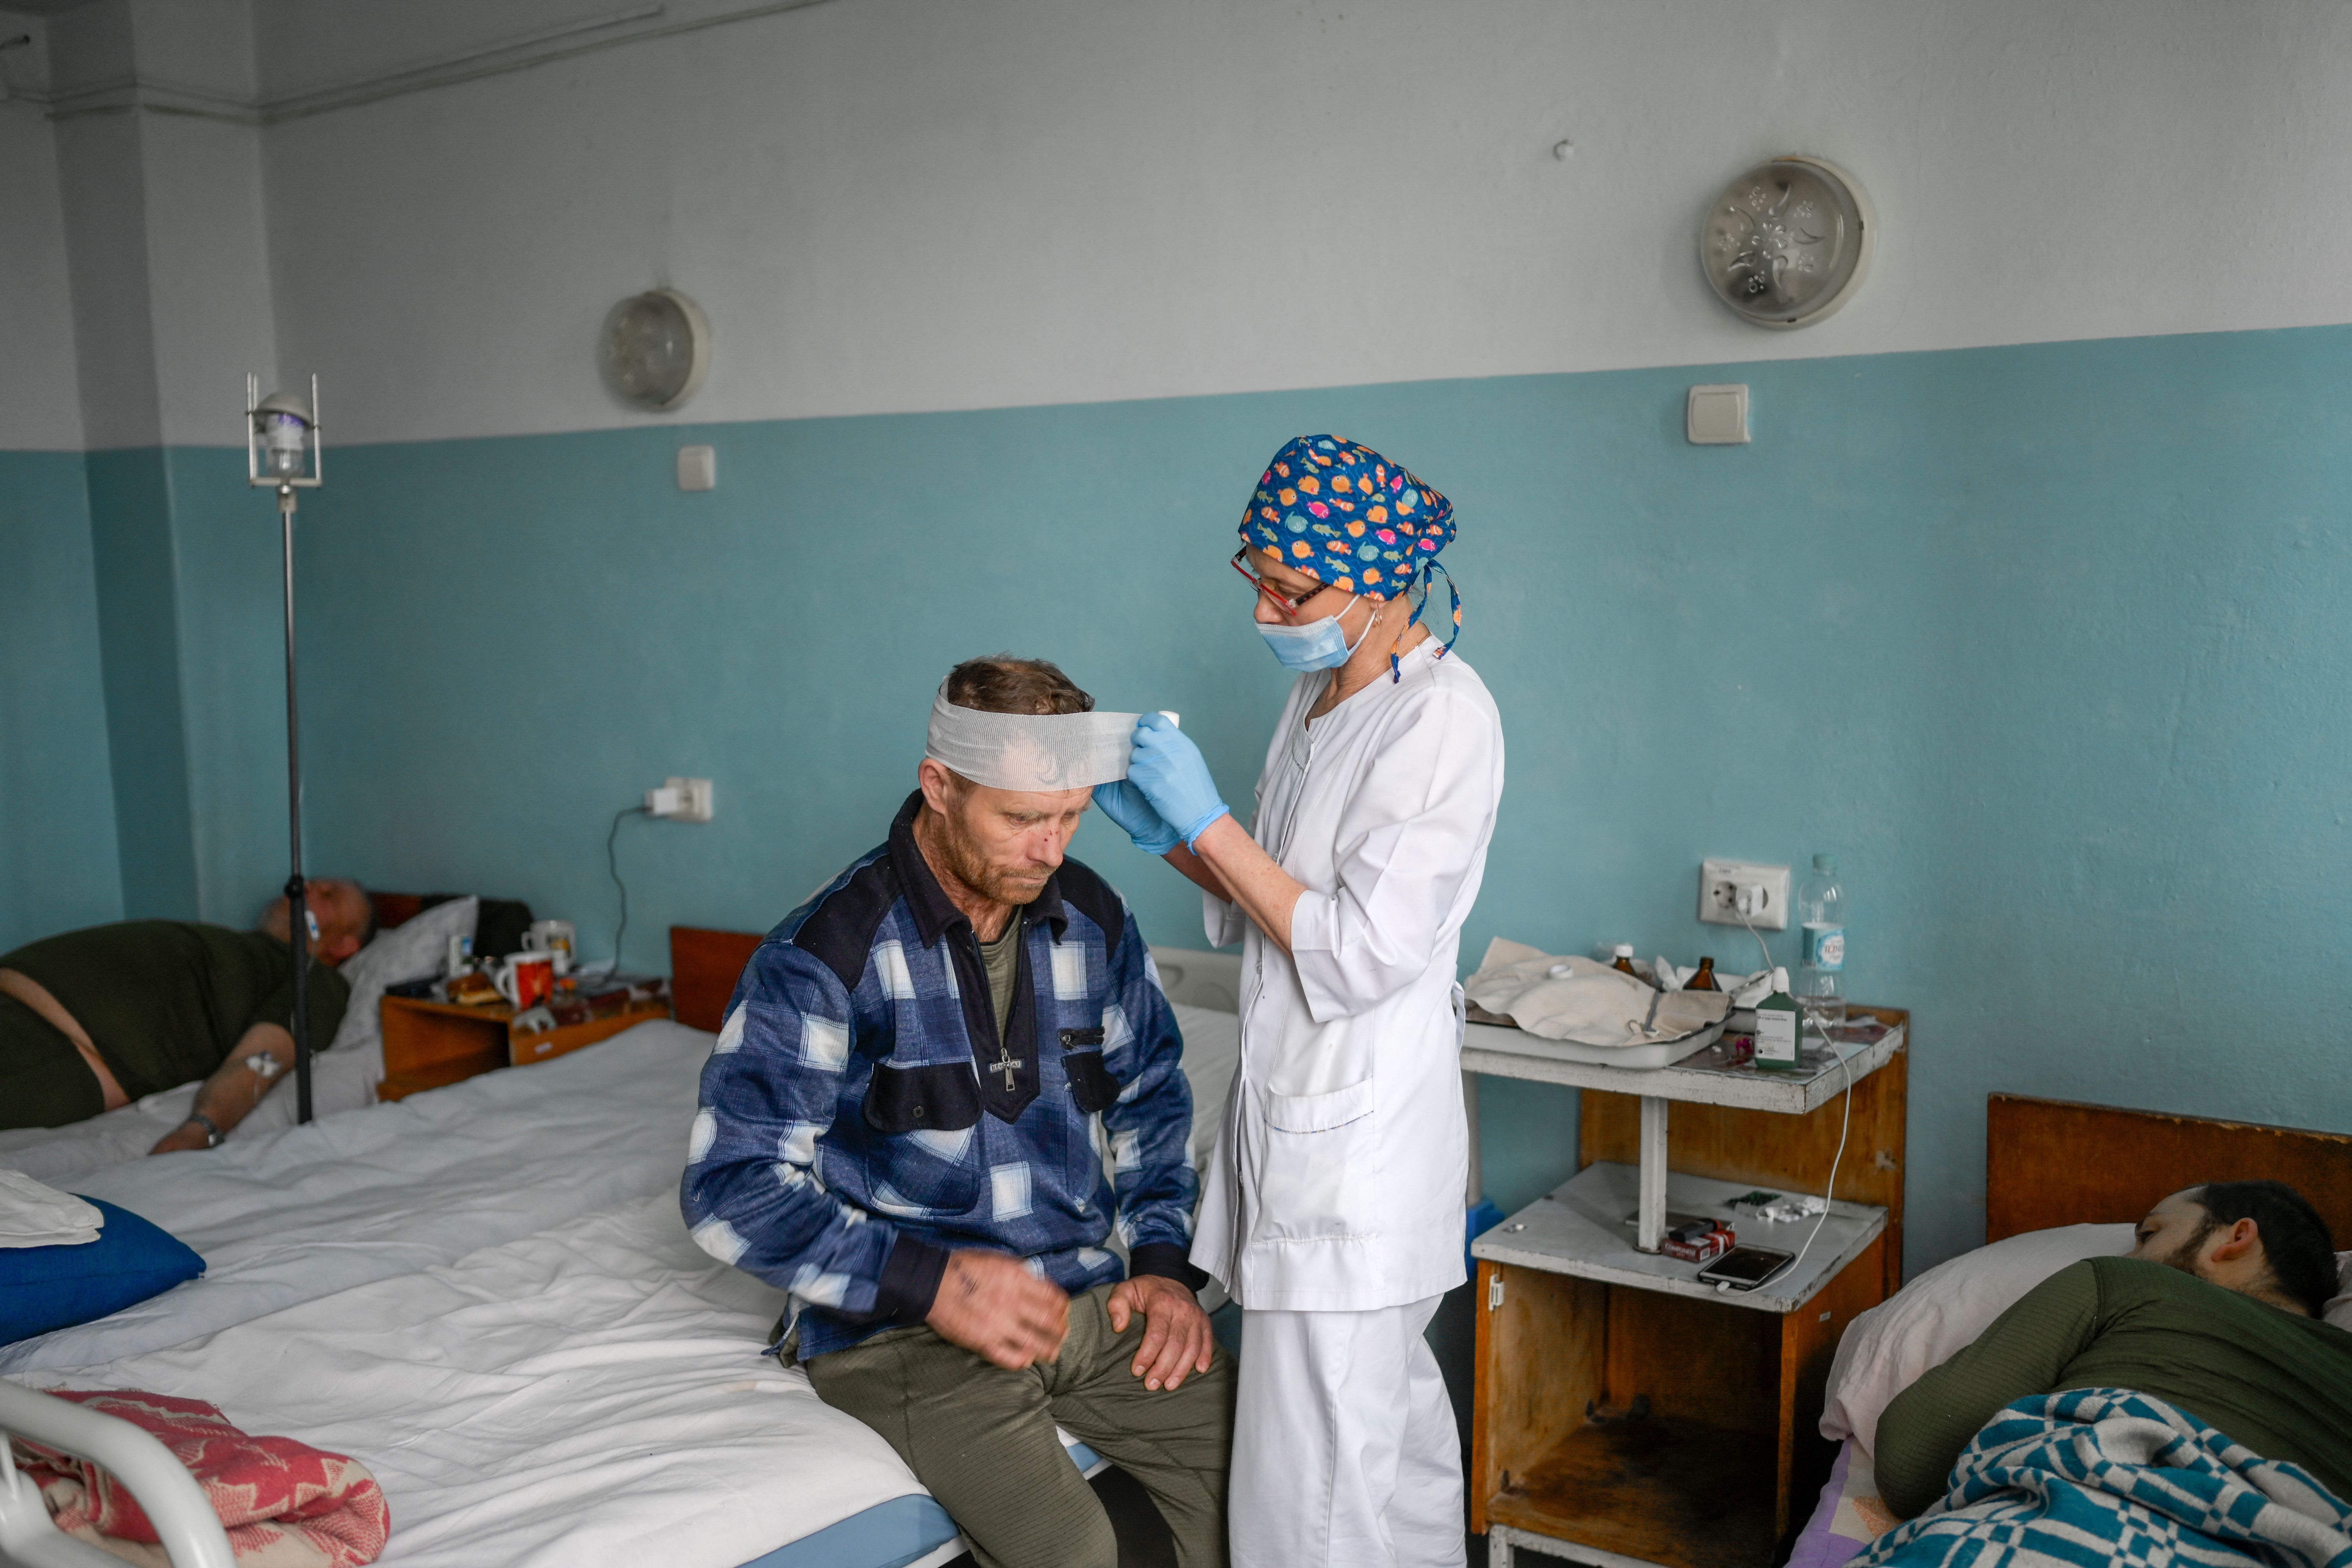 A Ukrainian man injured during Russian attack receives treatment in the central hospital of Mykolaiv, 100km away from Odessa, western Ukraine on March 8.